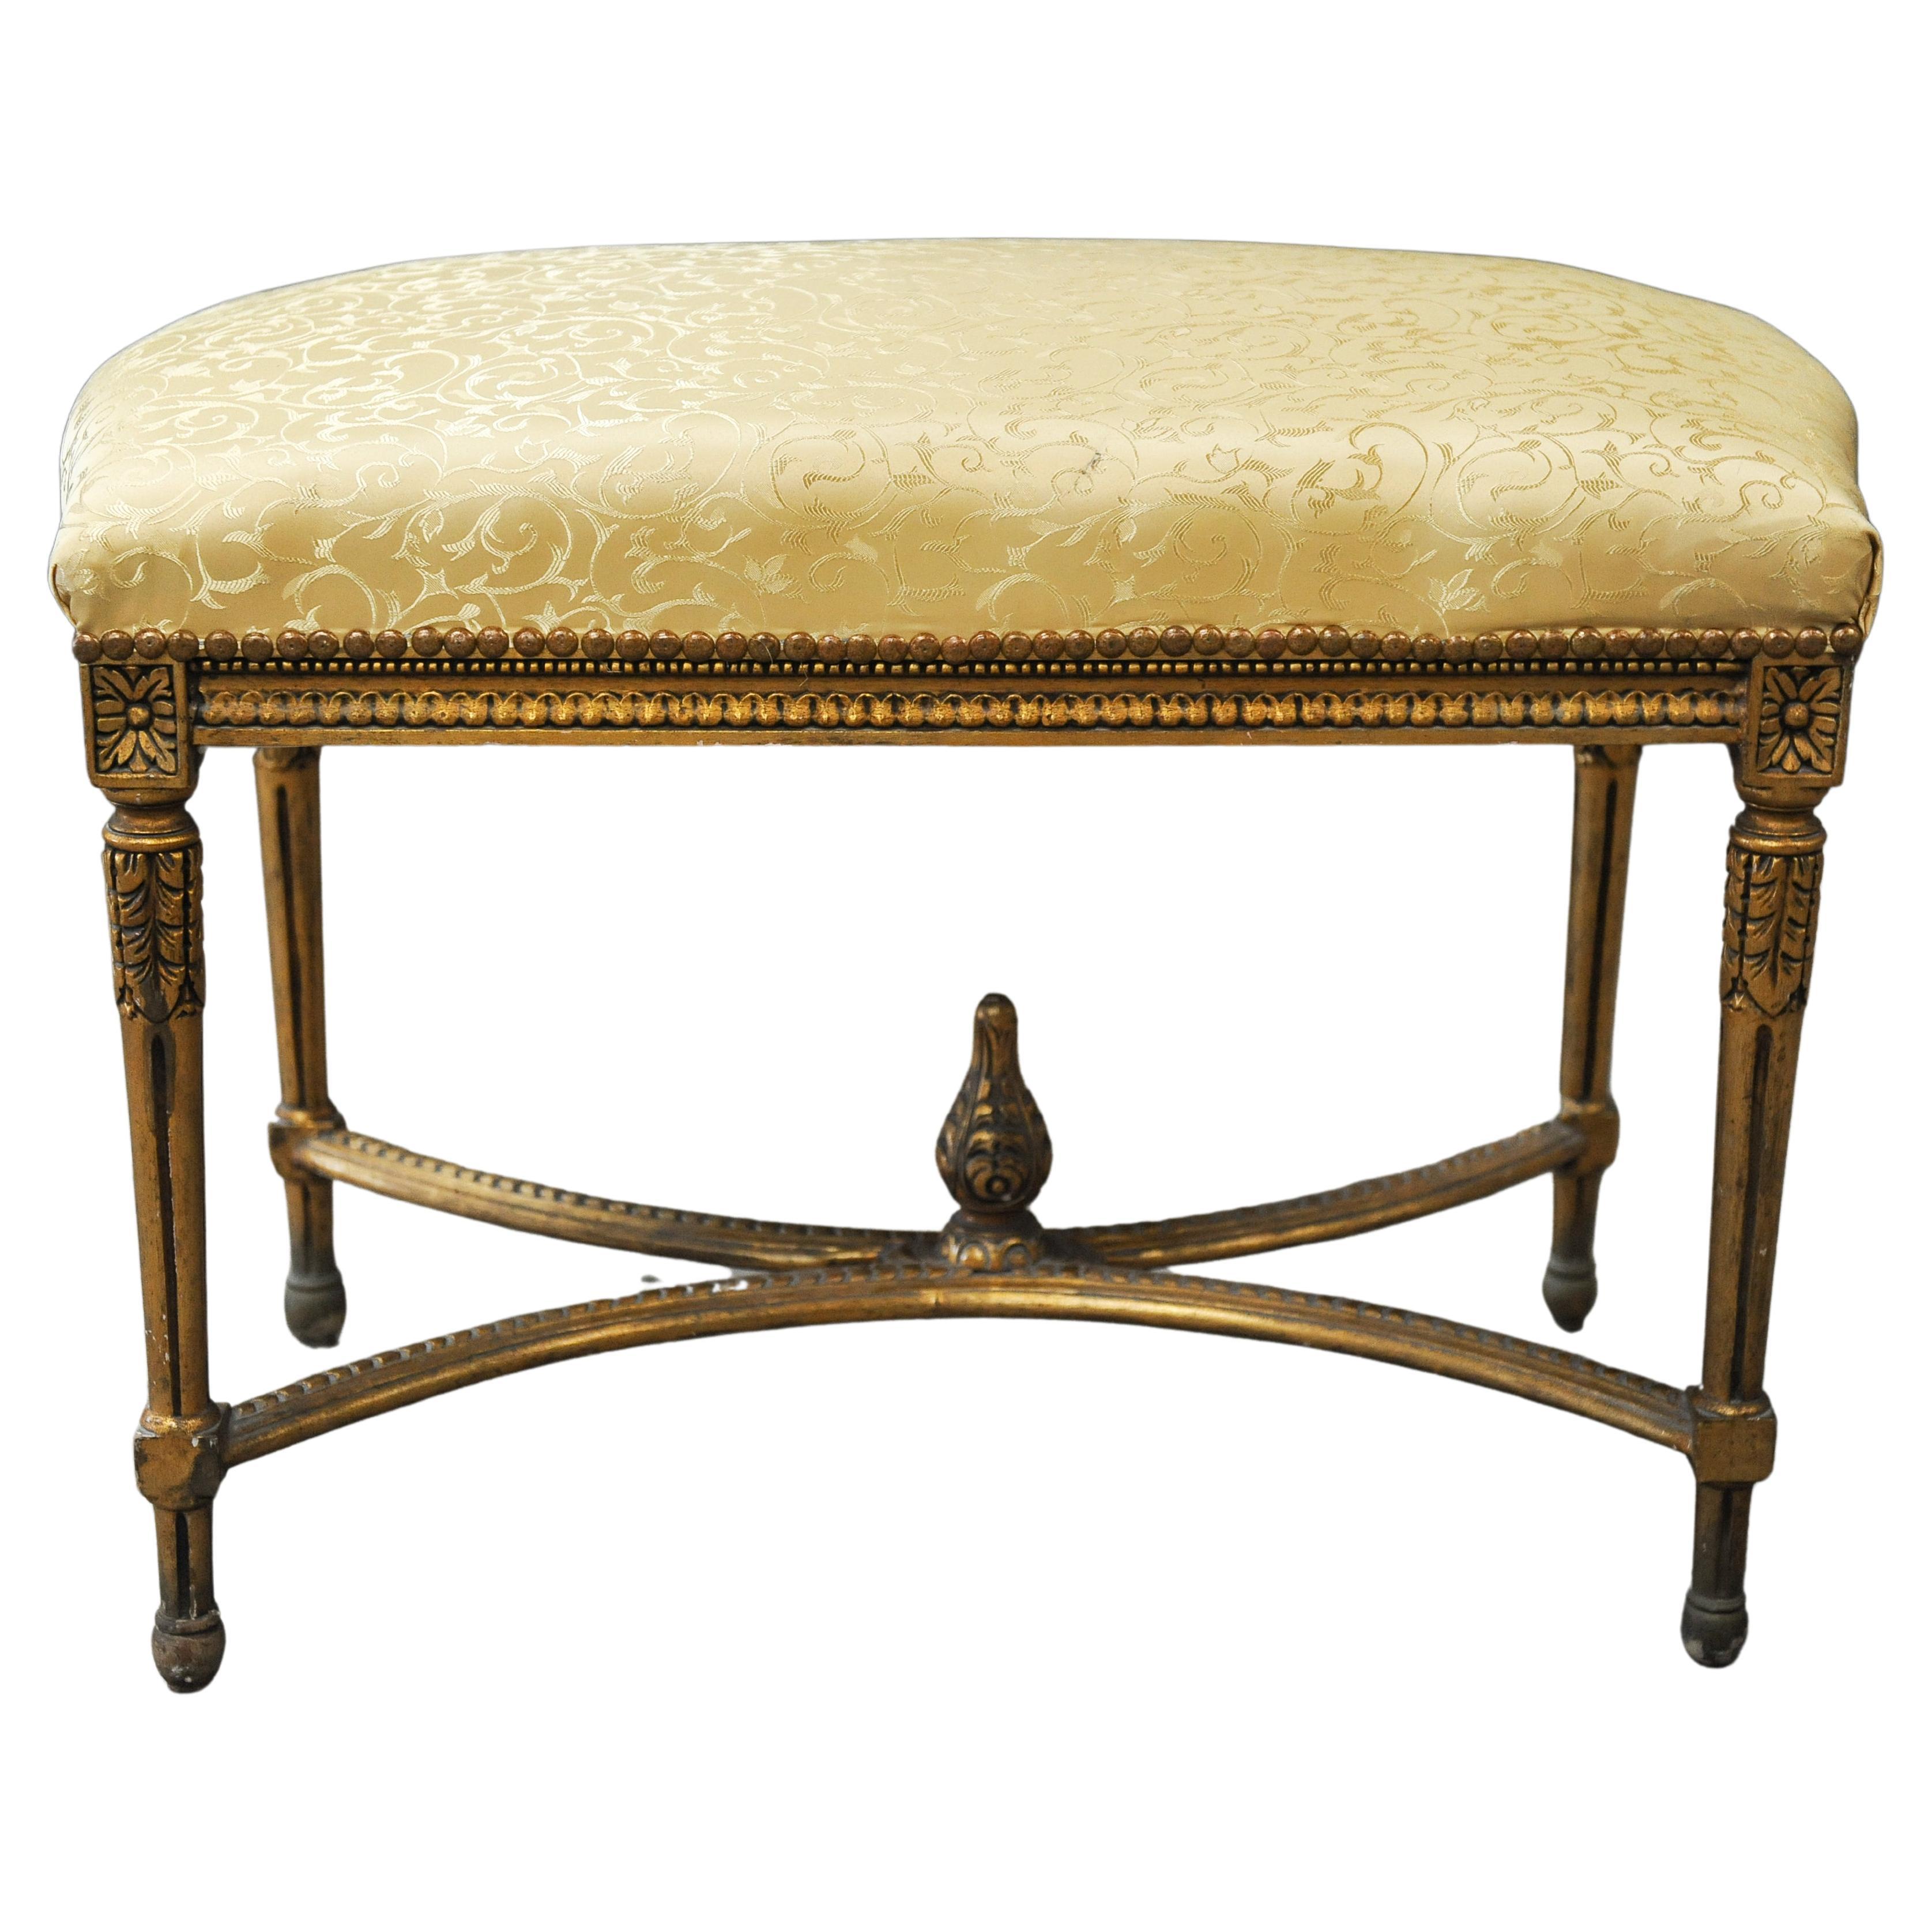 Rococo French Gilt Wood Window Seat With Gilt Carved Floral Motifs, With Damask Silk  For Sale